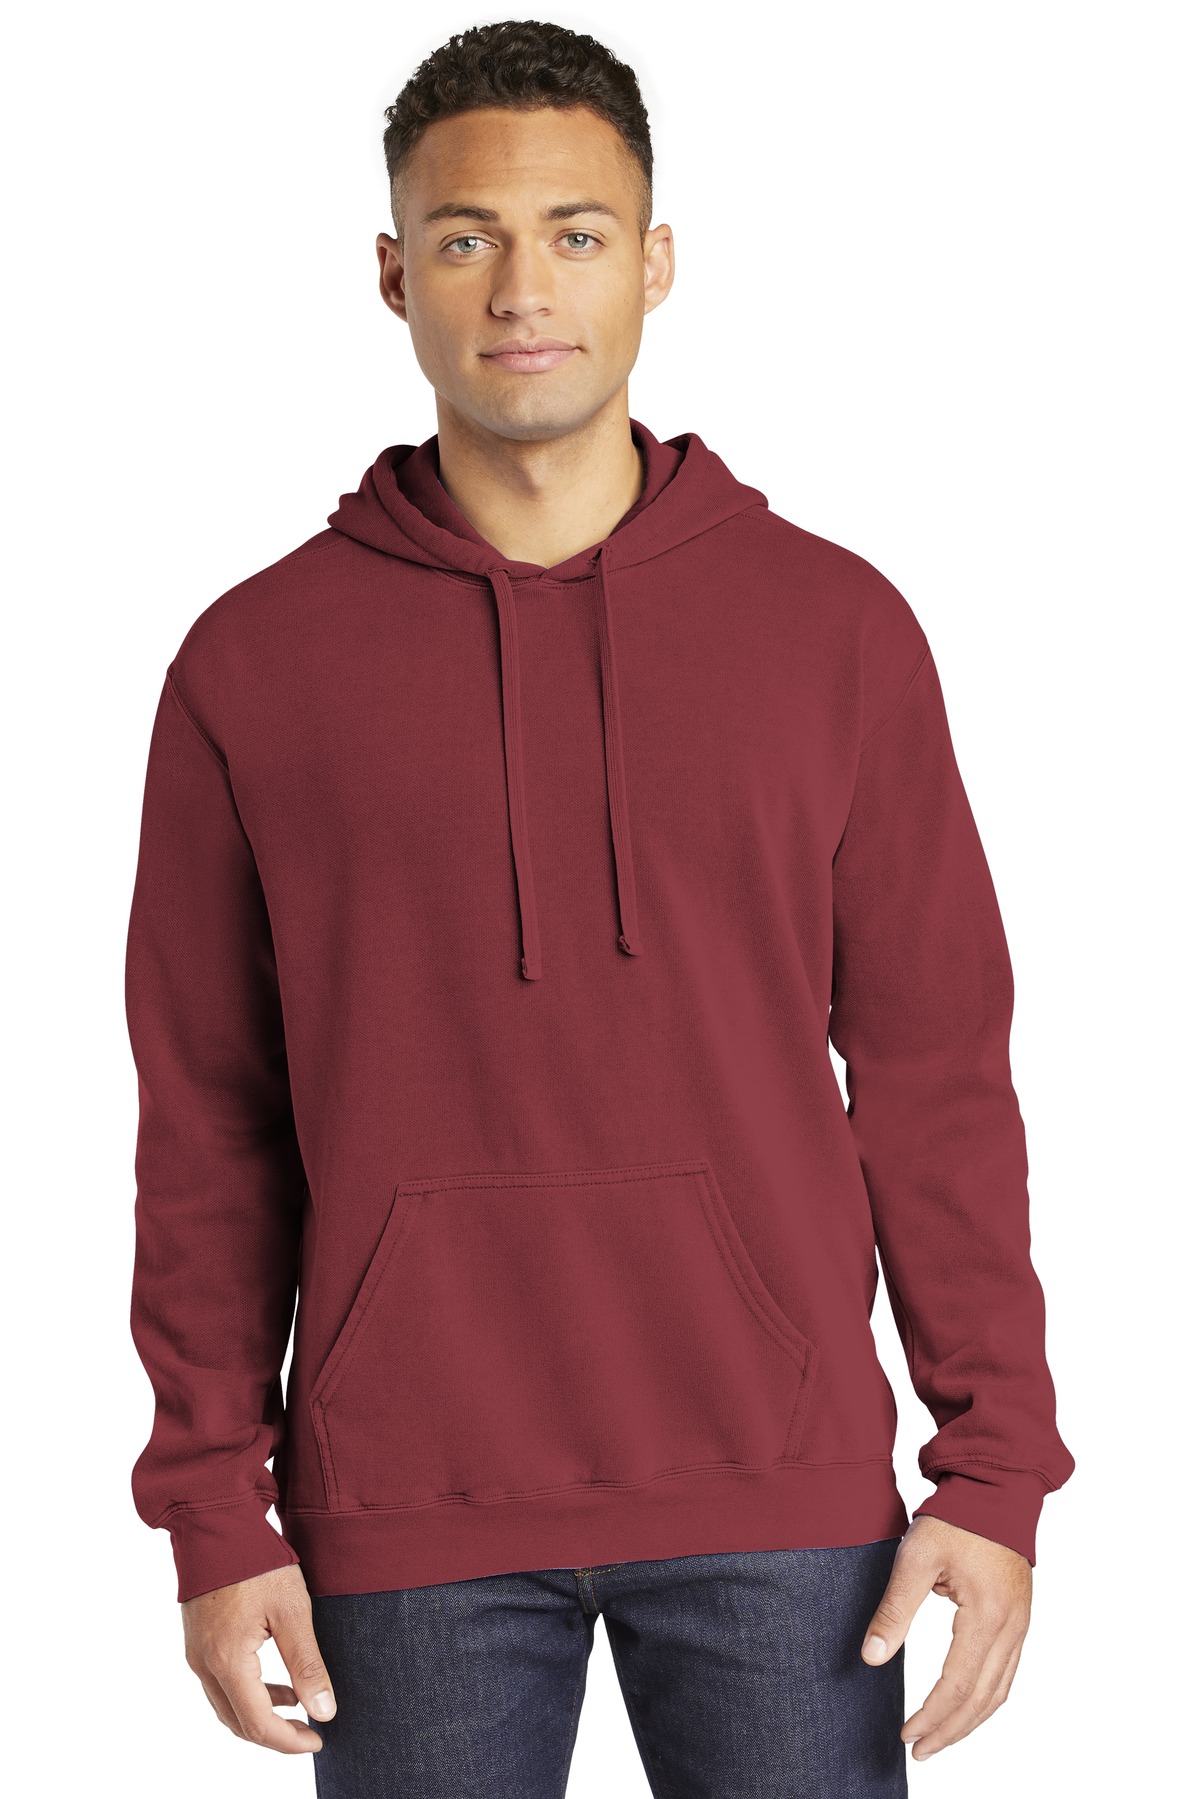 Comfort Colors 9.5 oz. Garment-Dyed Pullover Hoodie. 1567 Grey S